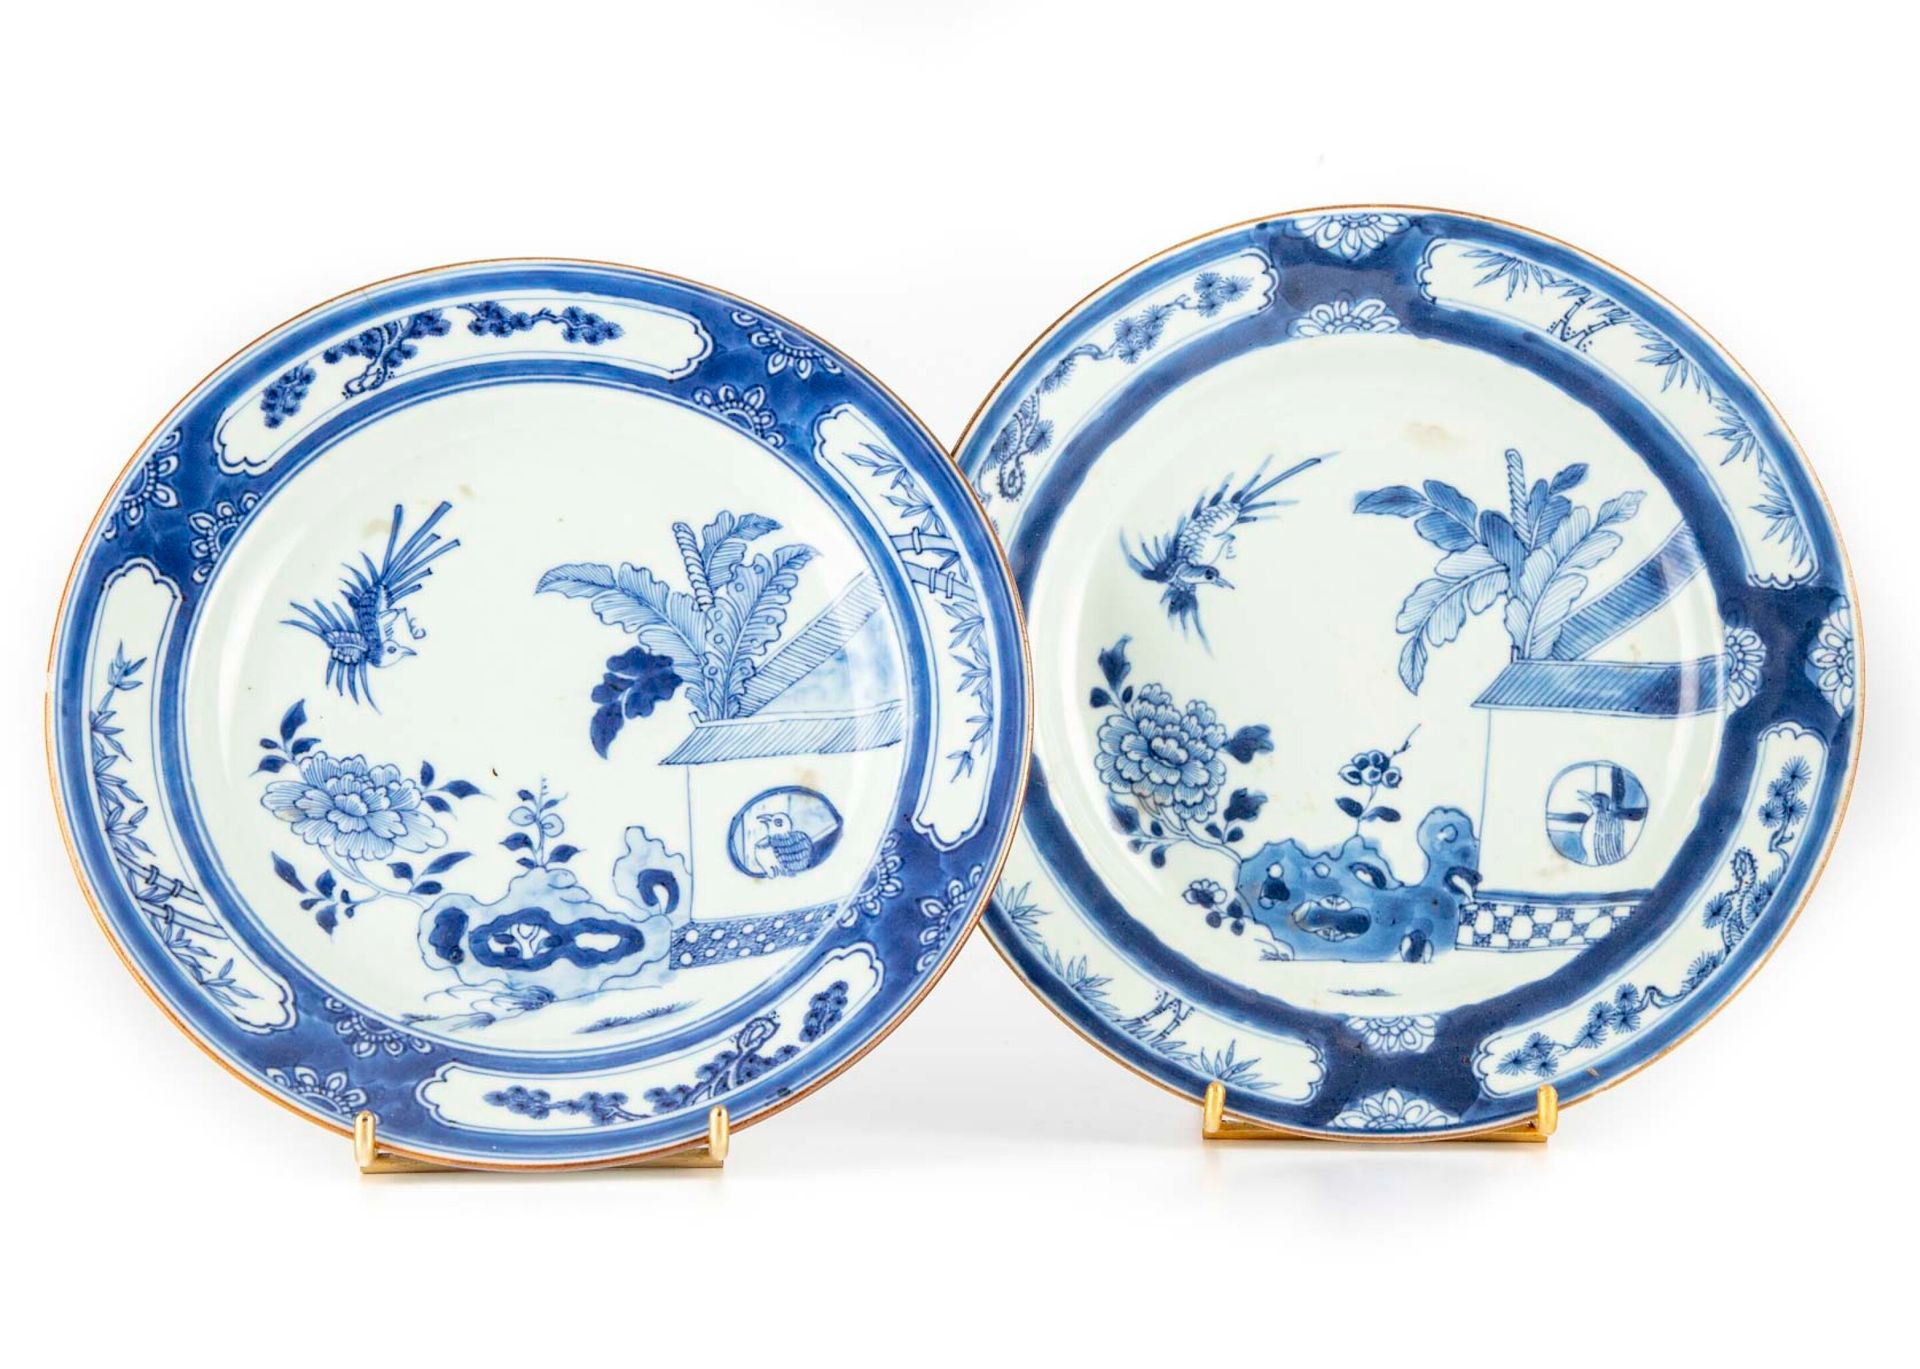 CHINE CHINA

Two porcelain plates with blue monochrome decoration of a cuckoo in&hellip;